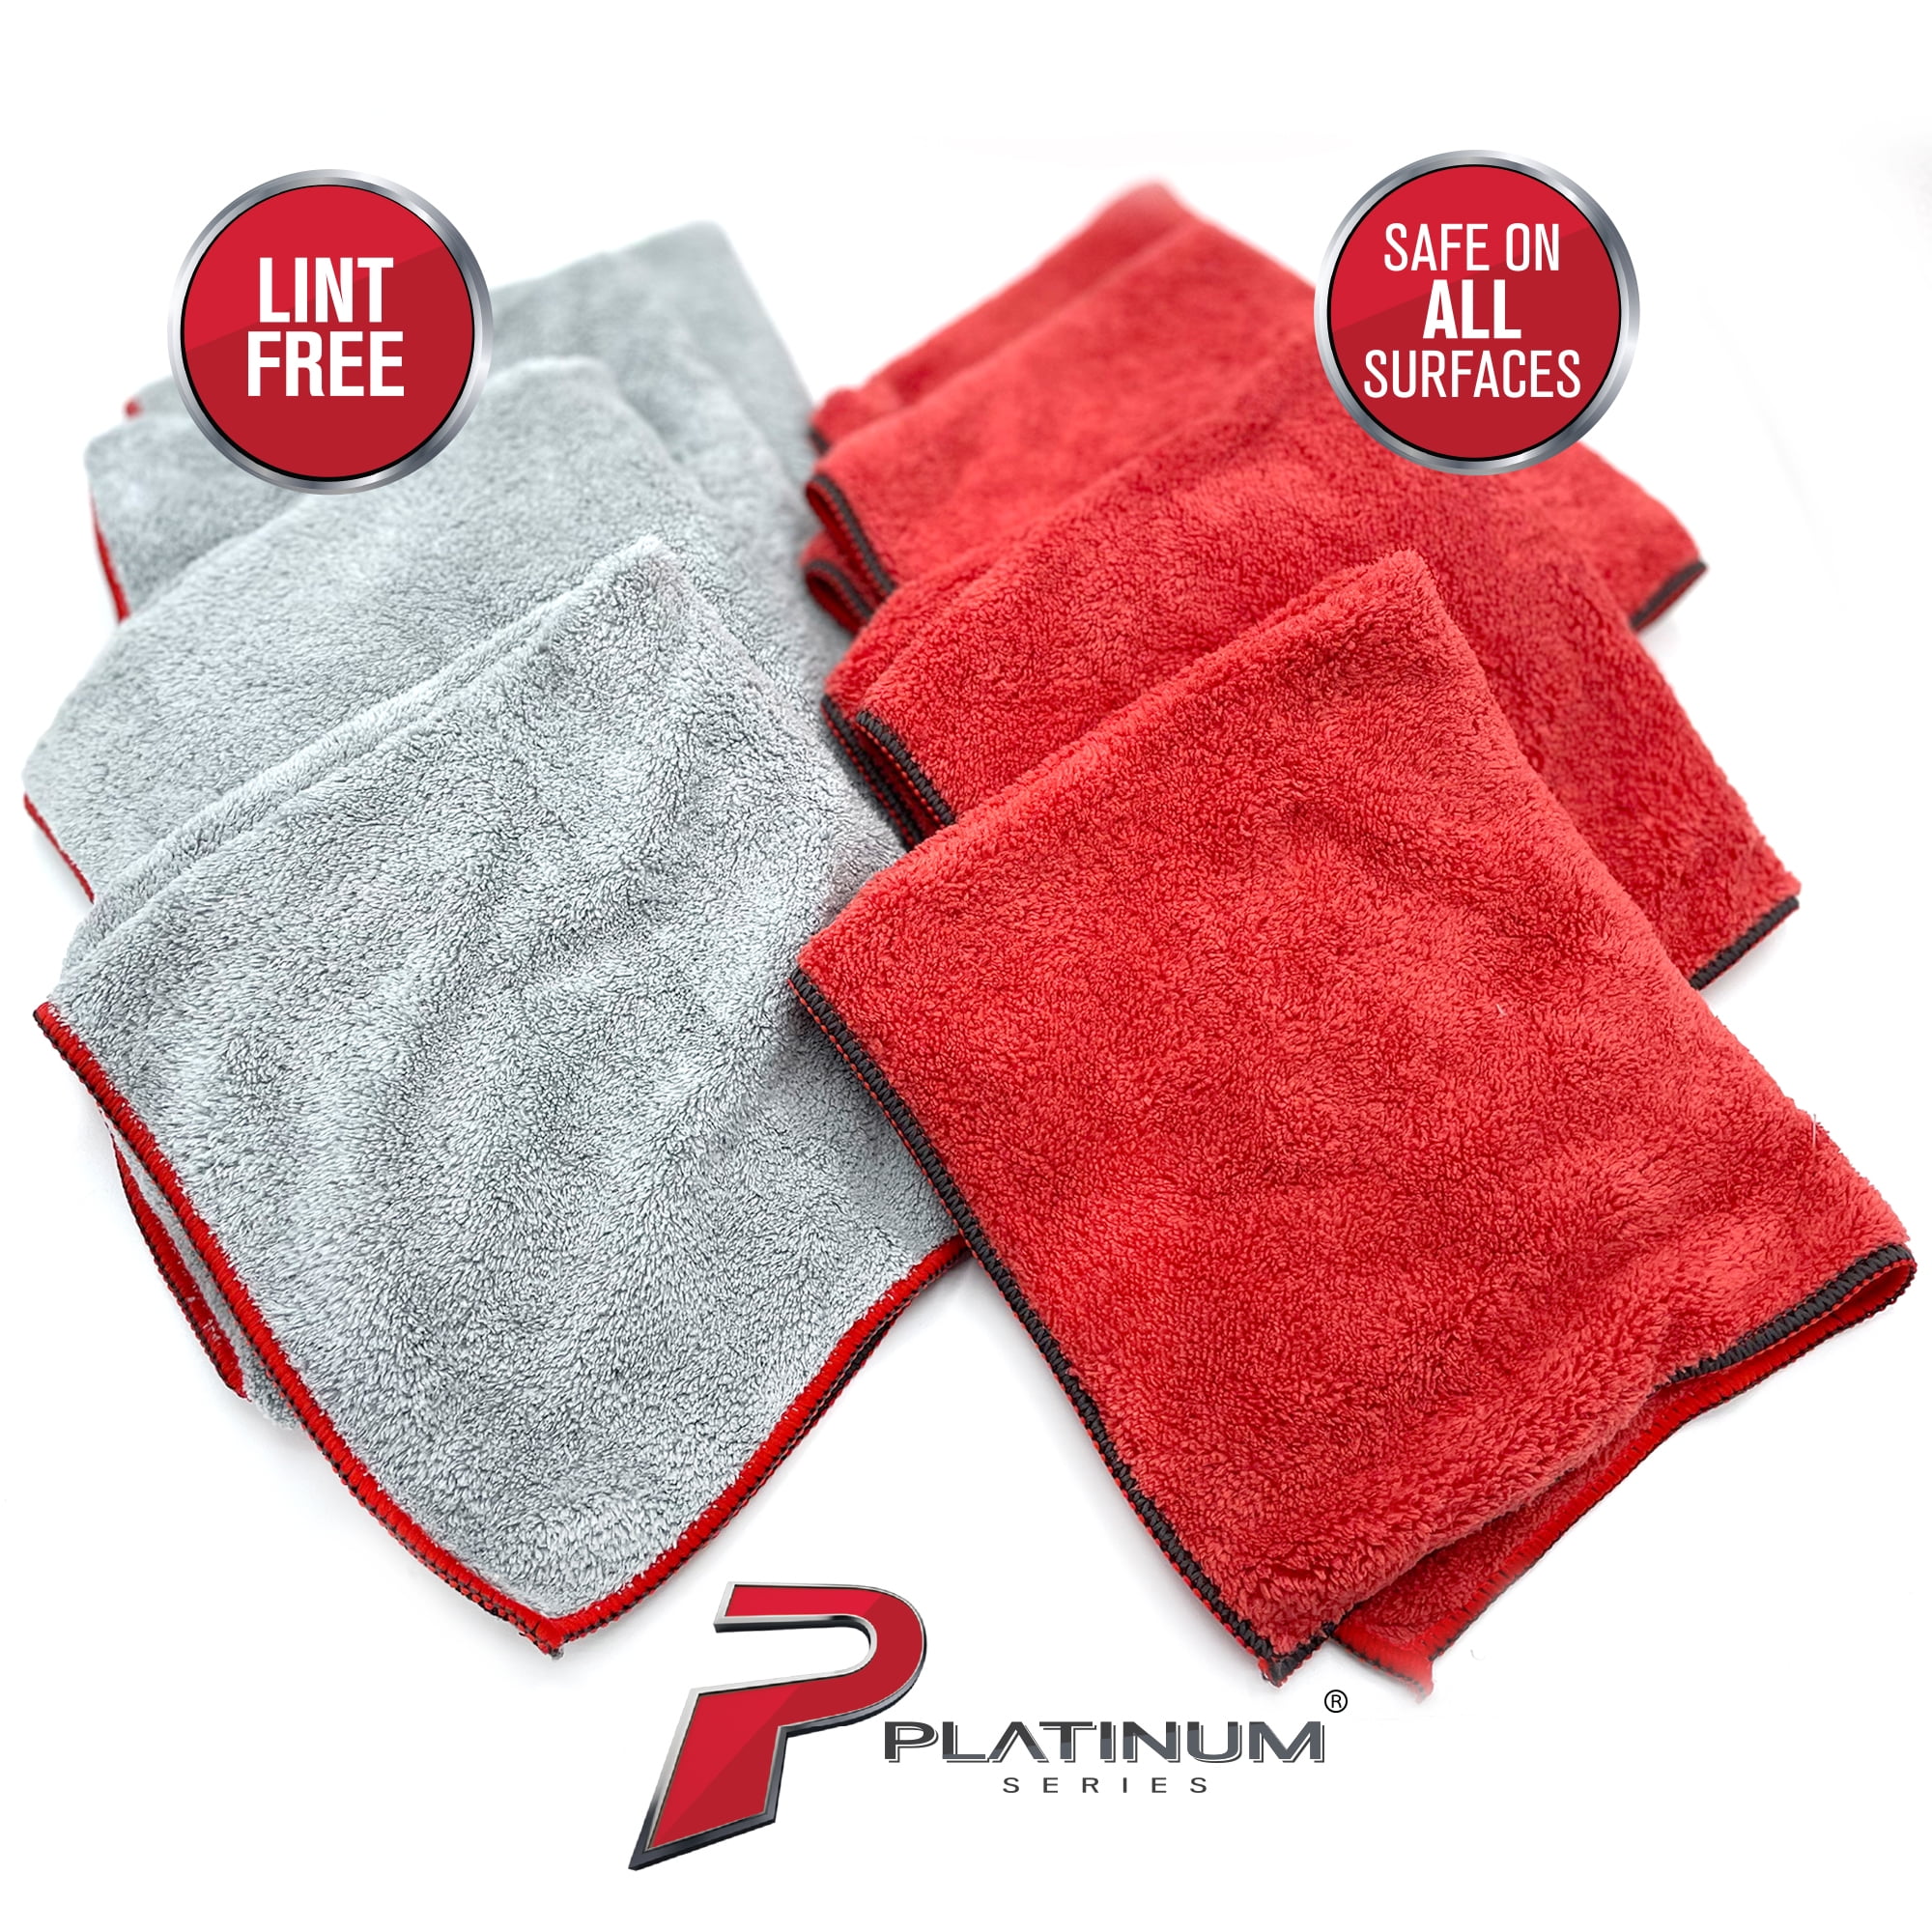 Autofiber [Mr. Everything] Premium Paintwork and Coating Leveling Towel (16x16) 10 Pack (Red)